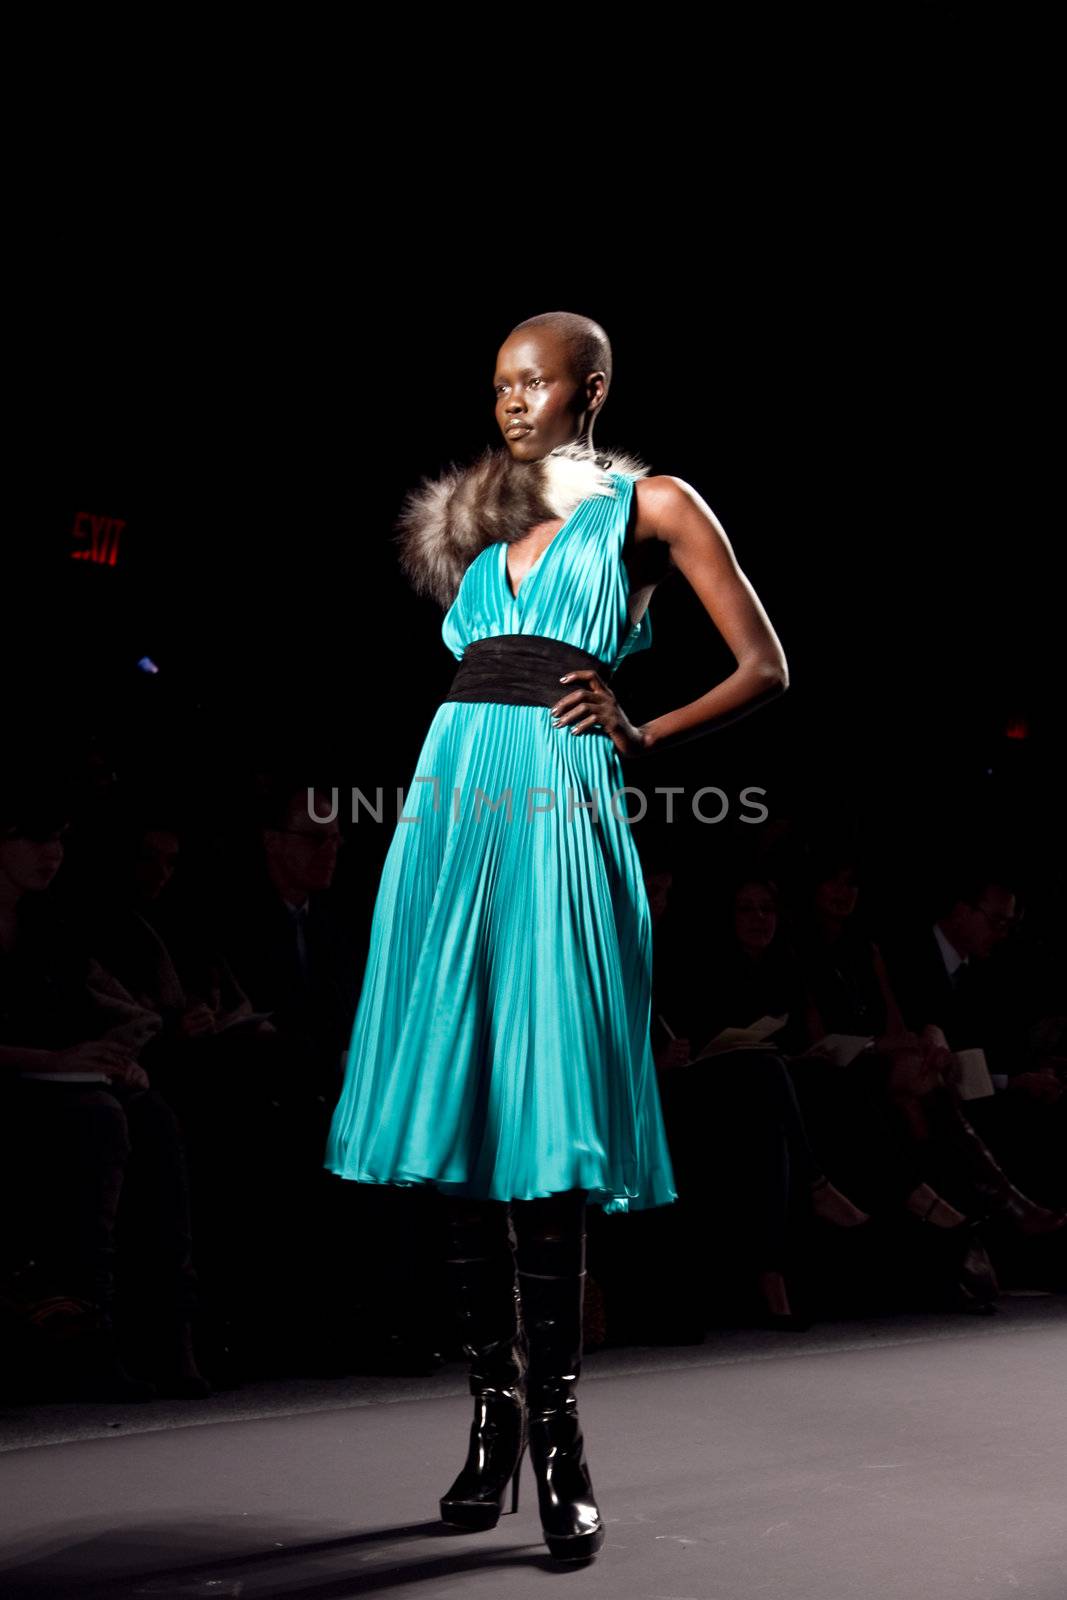 NEW YORK, NY - FEBRUARY 14: A model walks the runway at the Tracy Reese Fall 2011 fashion show during Mercedes-Benz Fashion Week at The Studio at Lincoln Center on February 14, 2011 in New York City. (Photo by Diana Beato)